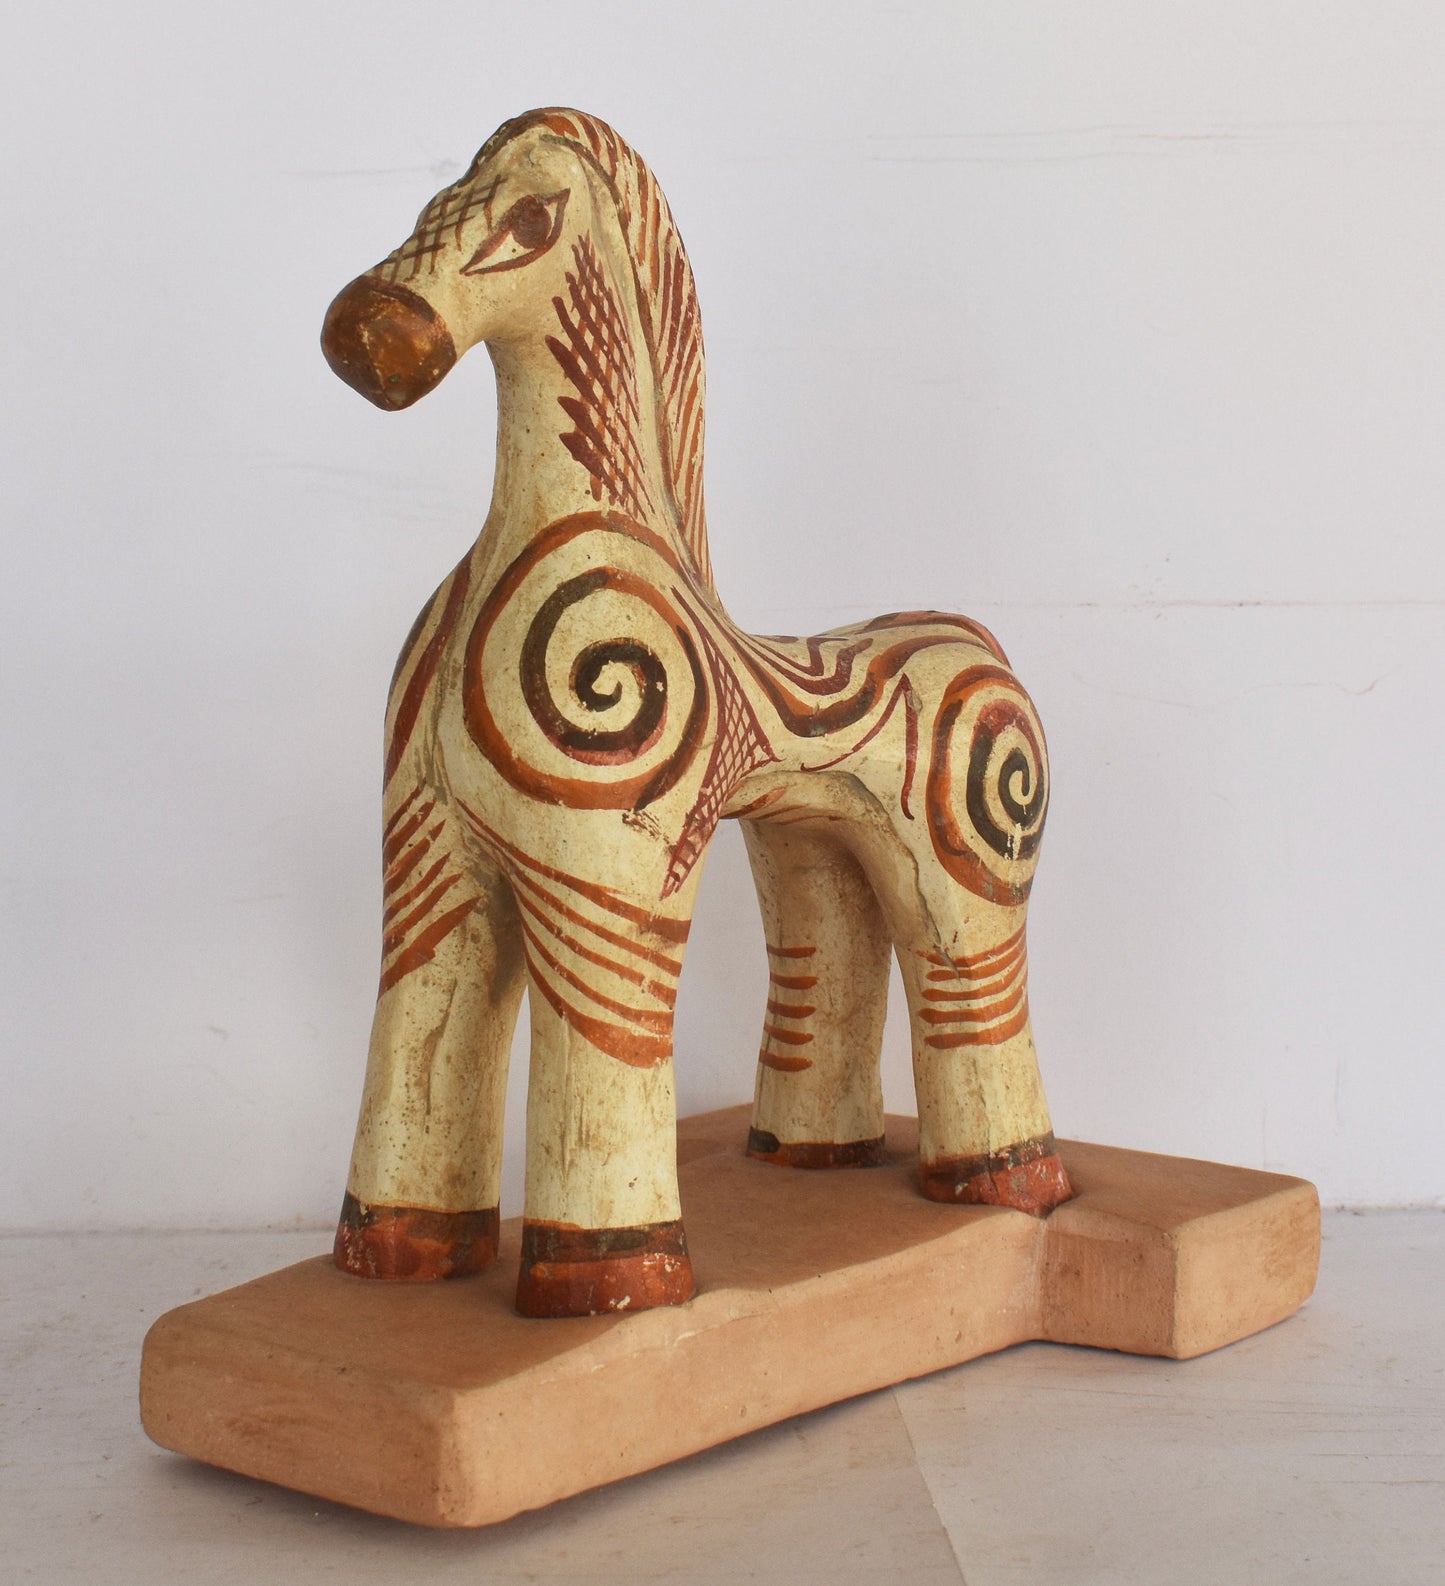 Ancient Greek Horse - Children's Toy - Athens, Attica  - Geometric Period Pottery - Museum Reproduction - Ceramic Artifact